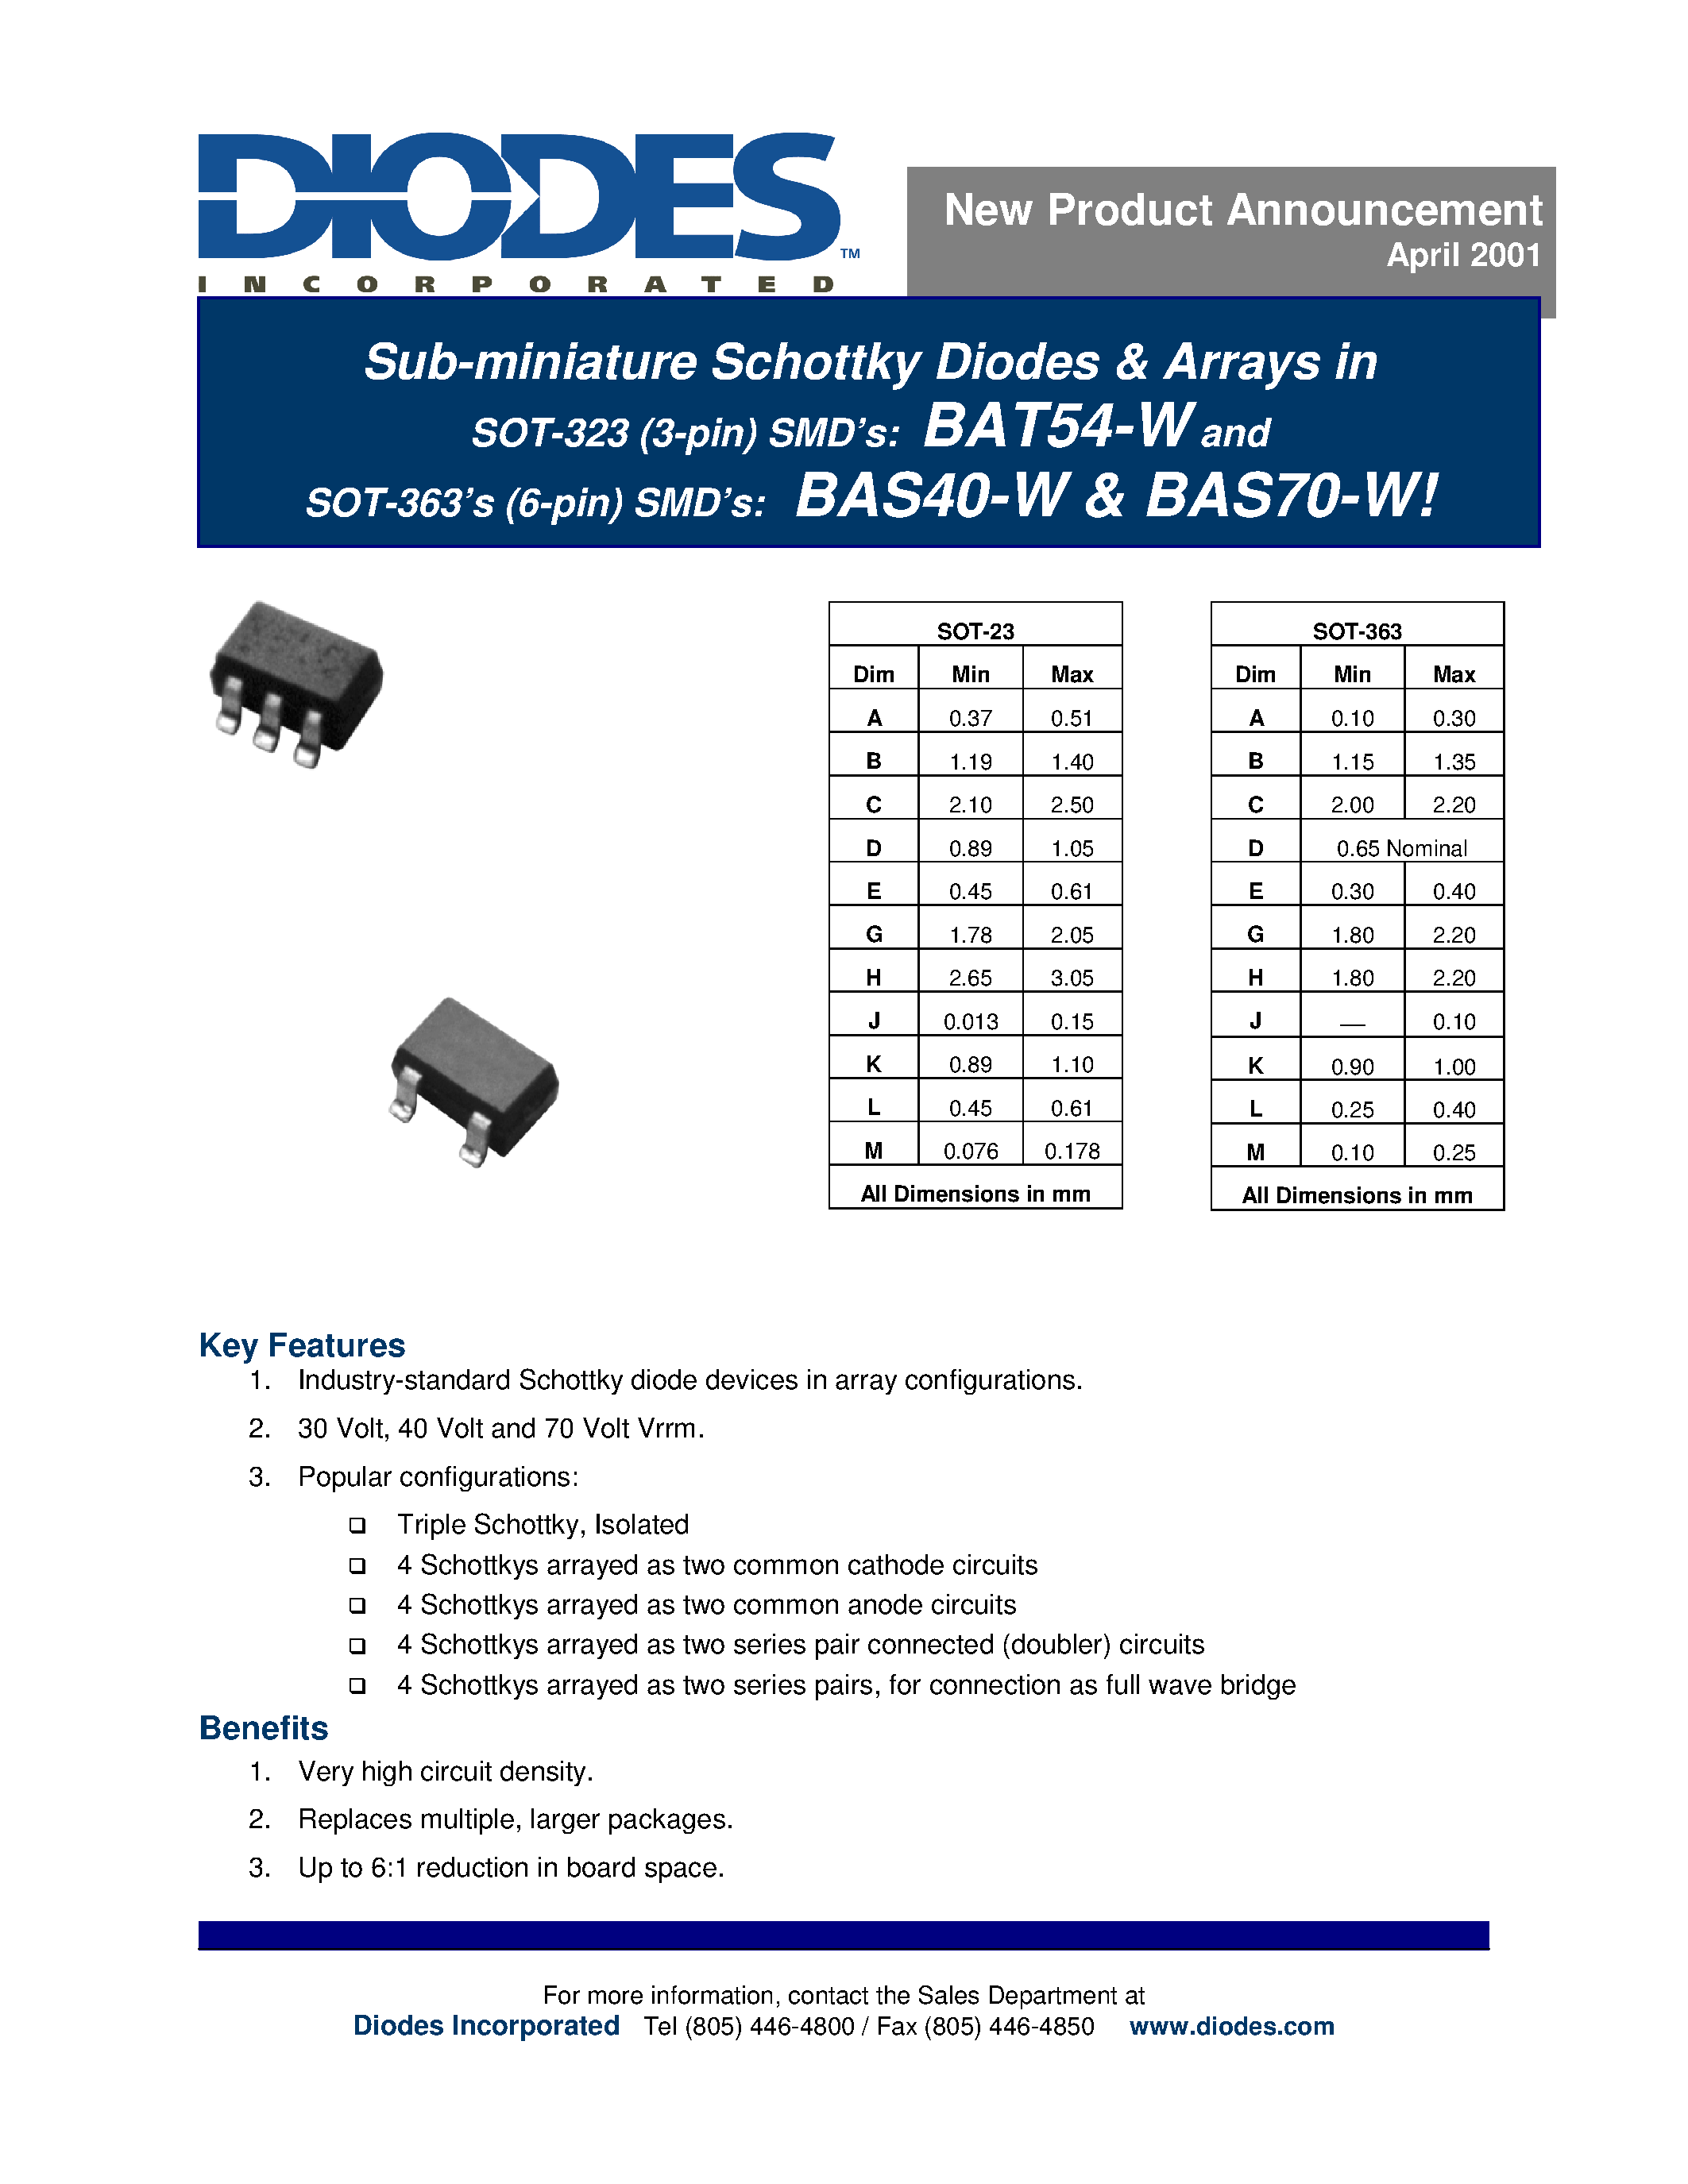 Datasheet BAS70-W - Sub-miniature Schottky Diodes & Arrays in page 1